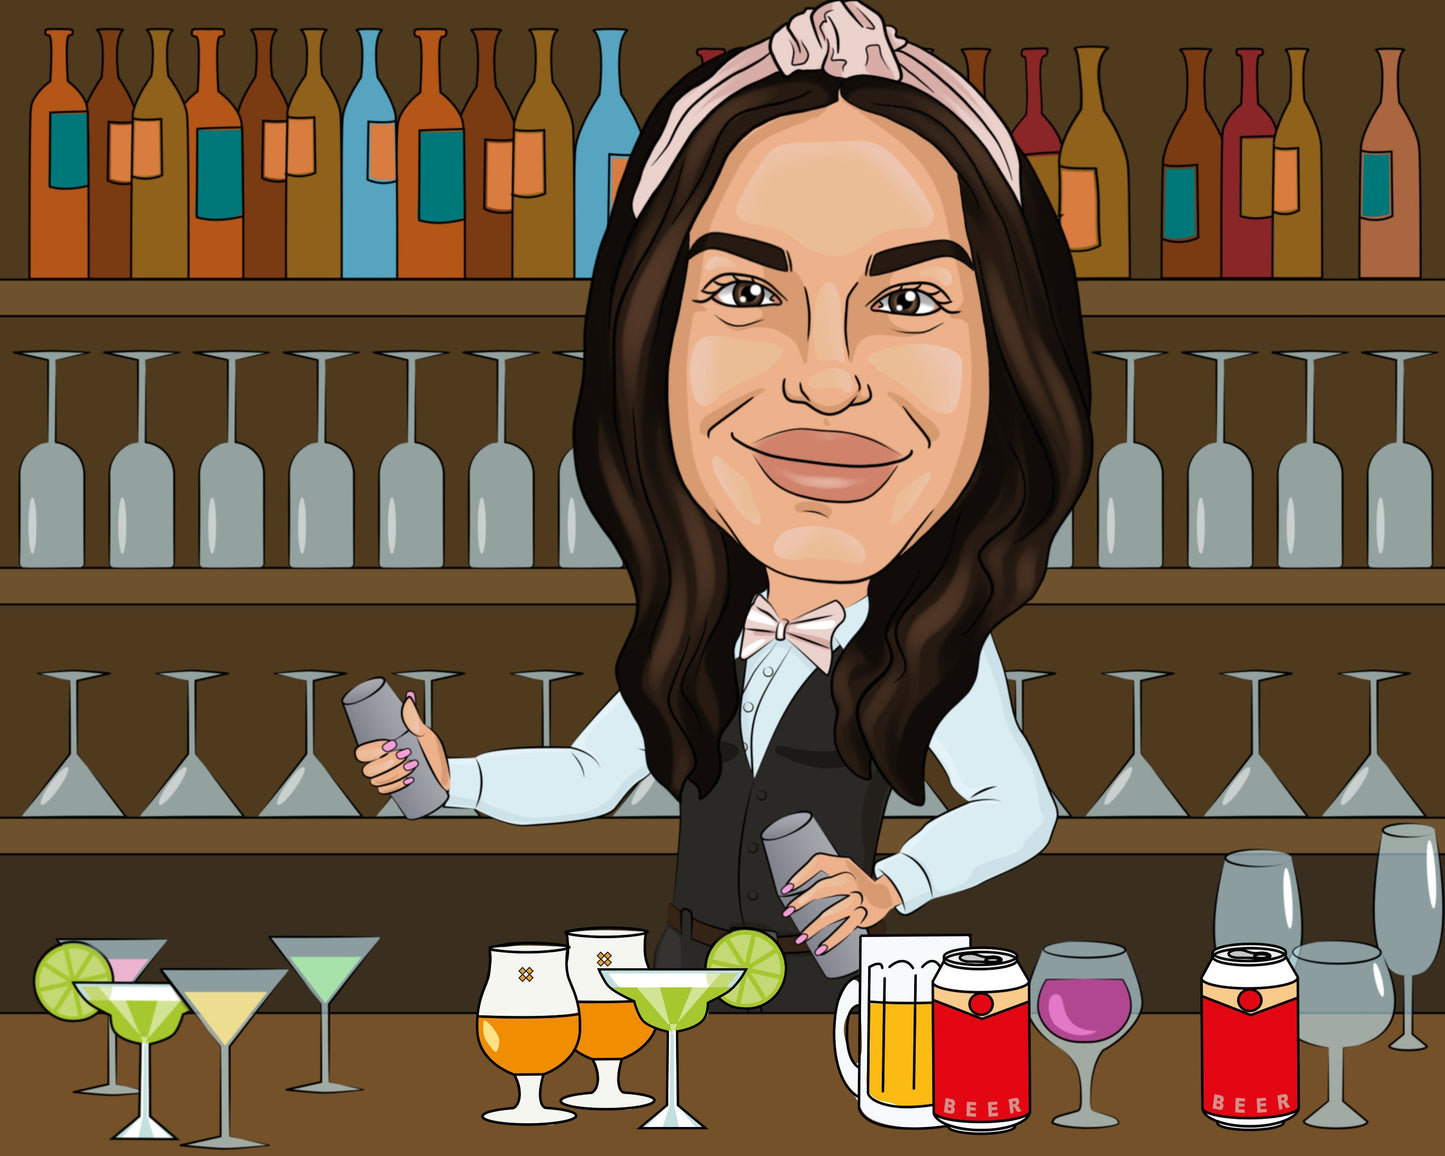 Bartender Gift - Custom Caricature Portrait From Photo/mixologist/bartender gifts